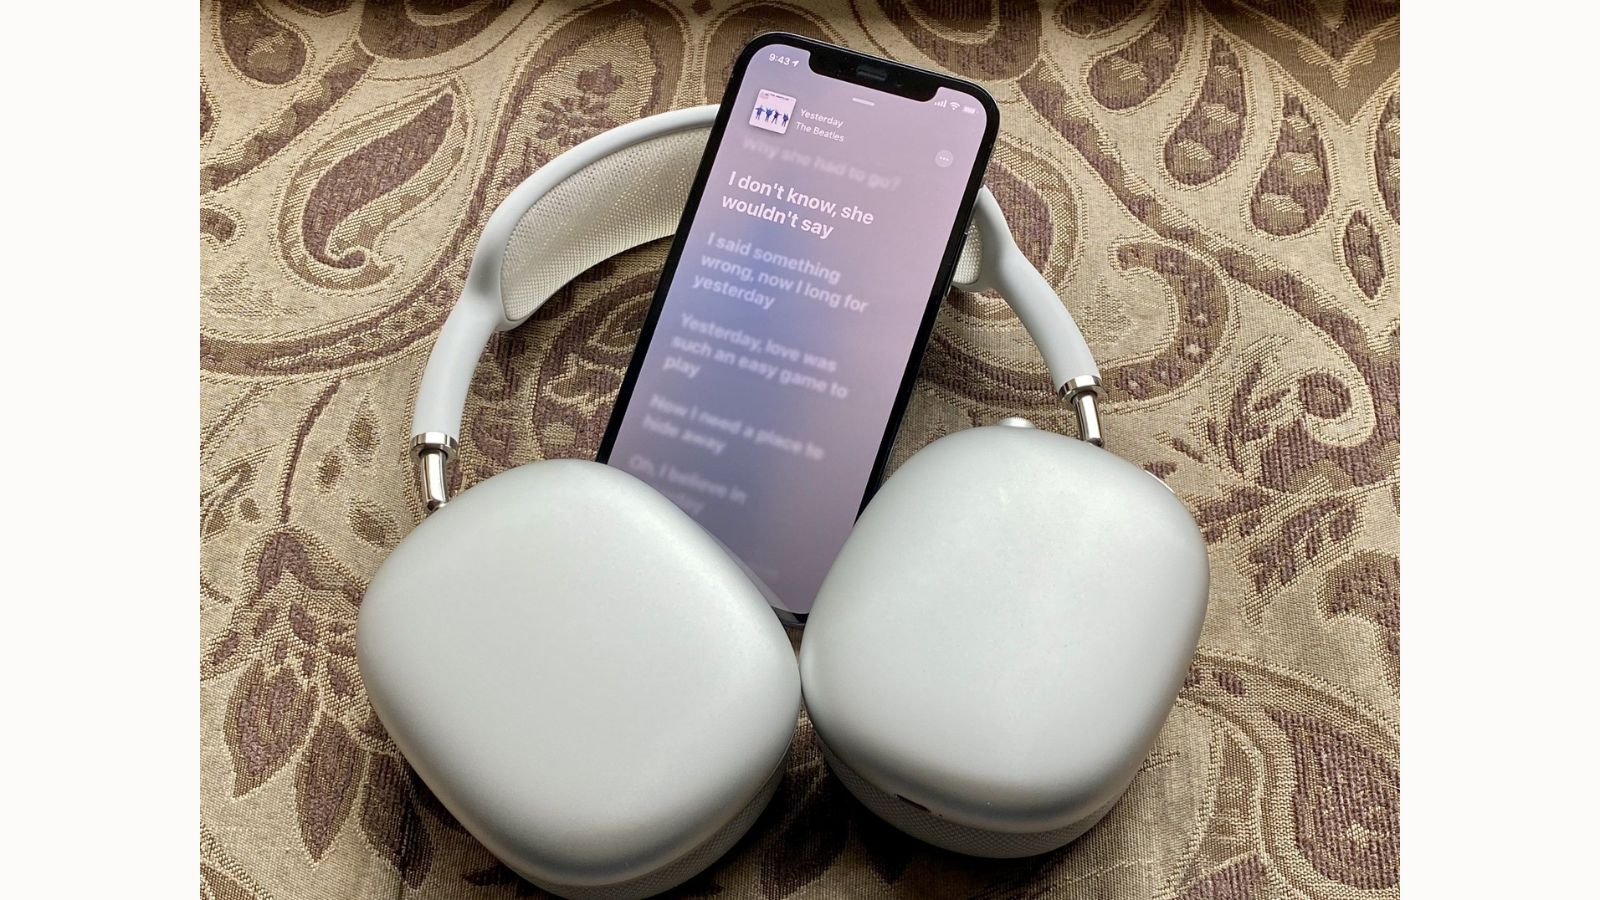 AirPods Max with iPhone playing Apple Music